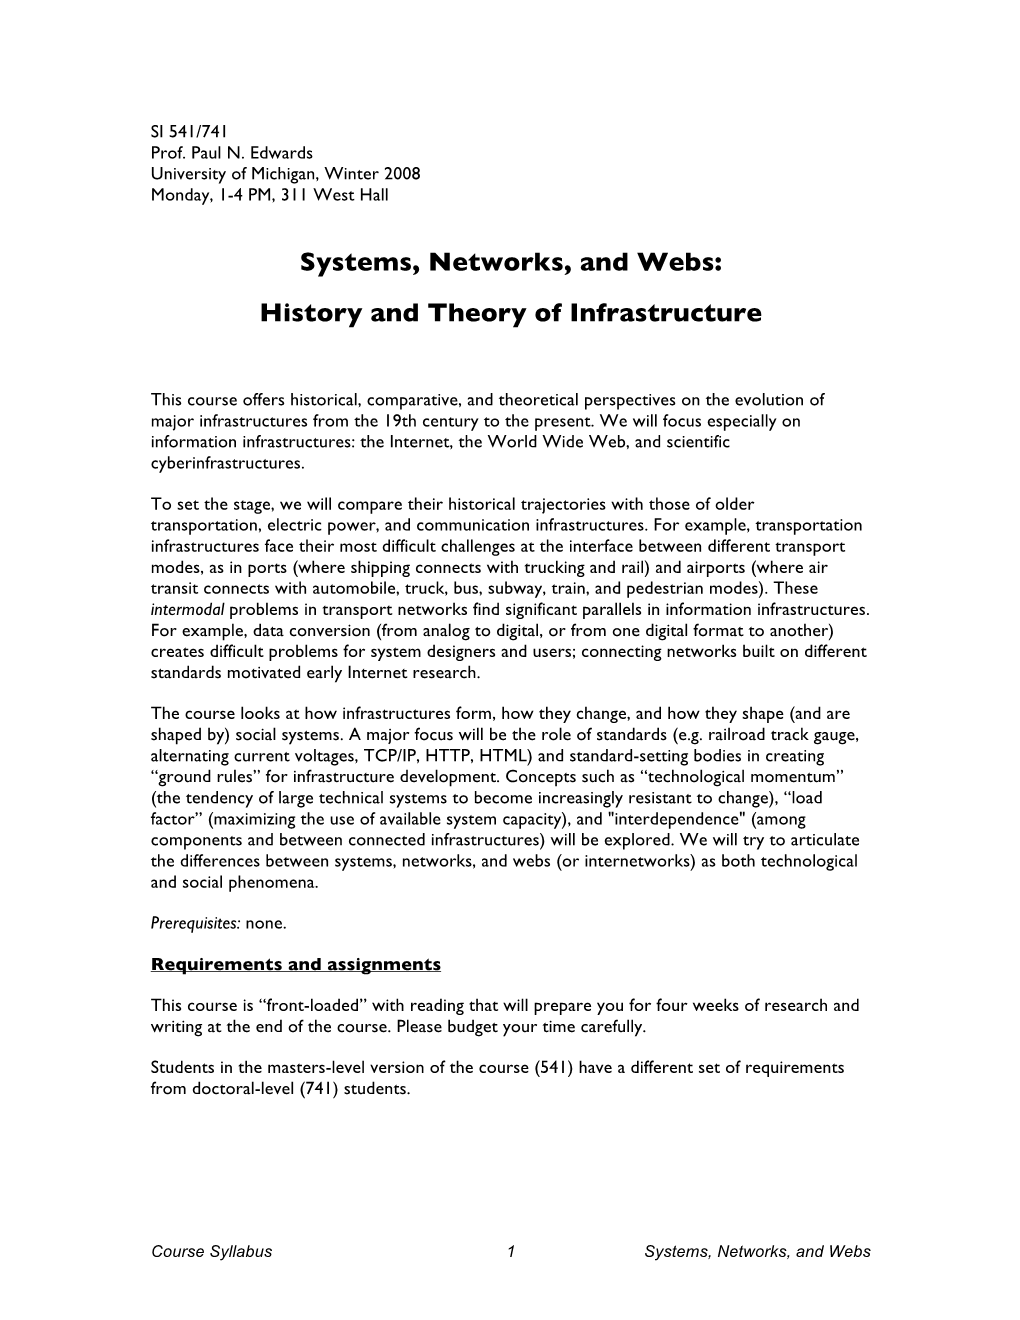 Systems, Networks, and Webs: History and Theory of Infrastructure